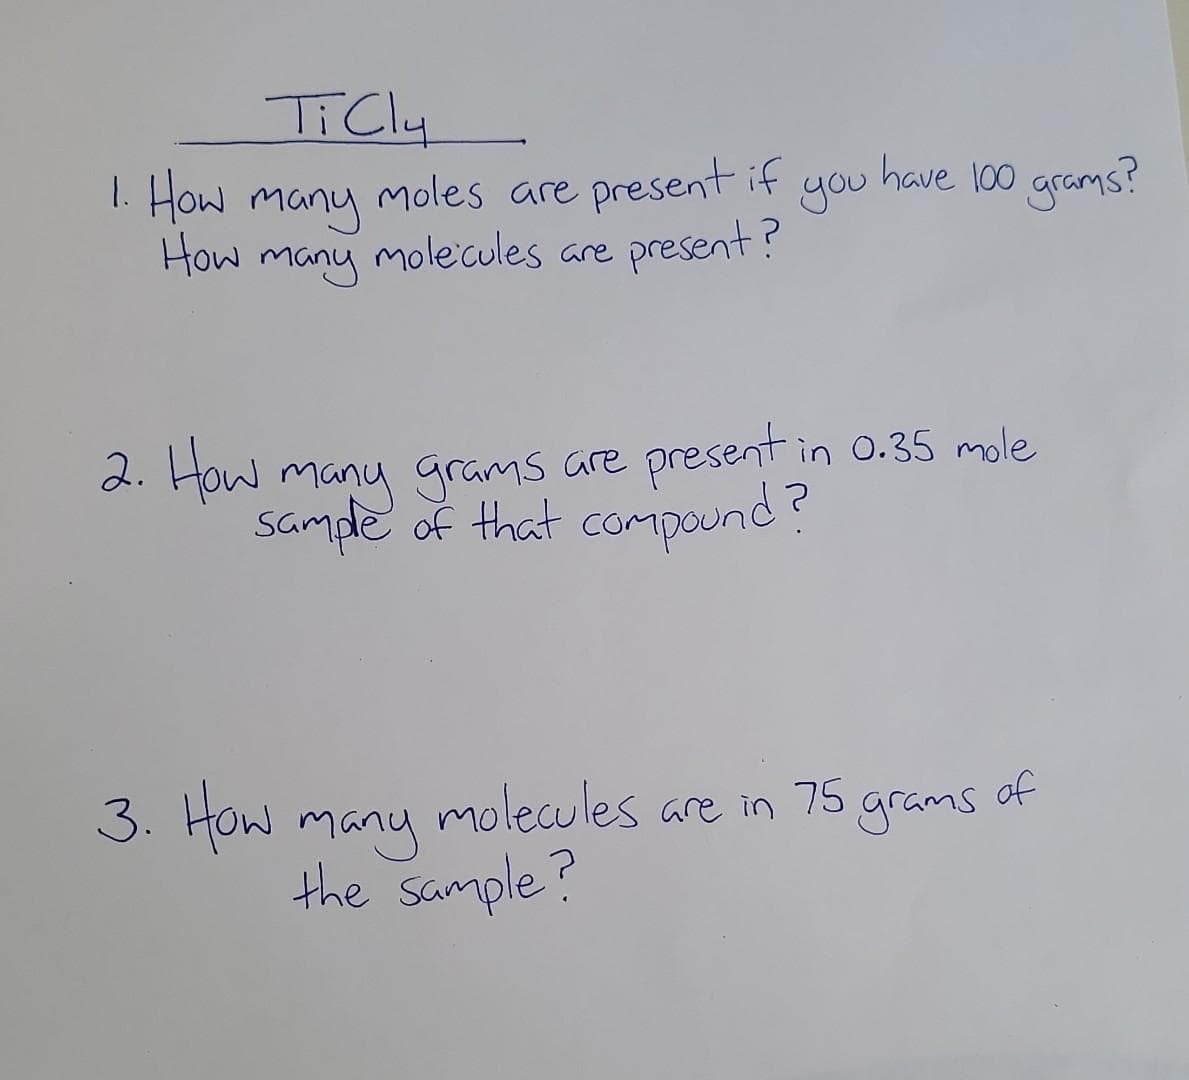 TiCly
1. How many
moles are present if
How many molecules are
molecules are present?
3. How
you
2. How many grams are present in 0.35 mole
sample of that compound?
have 100 grams?
many
the sample?
molecules are in 75 grams
of